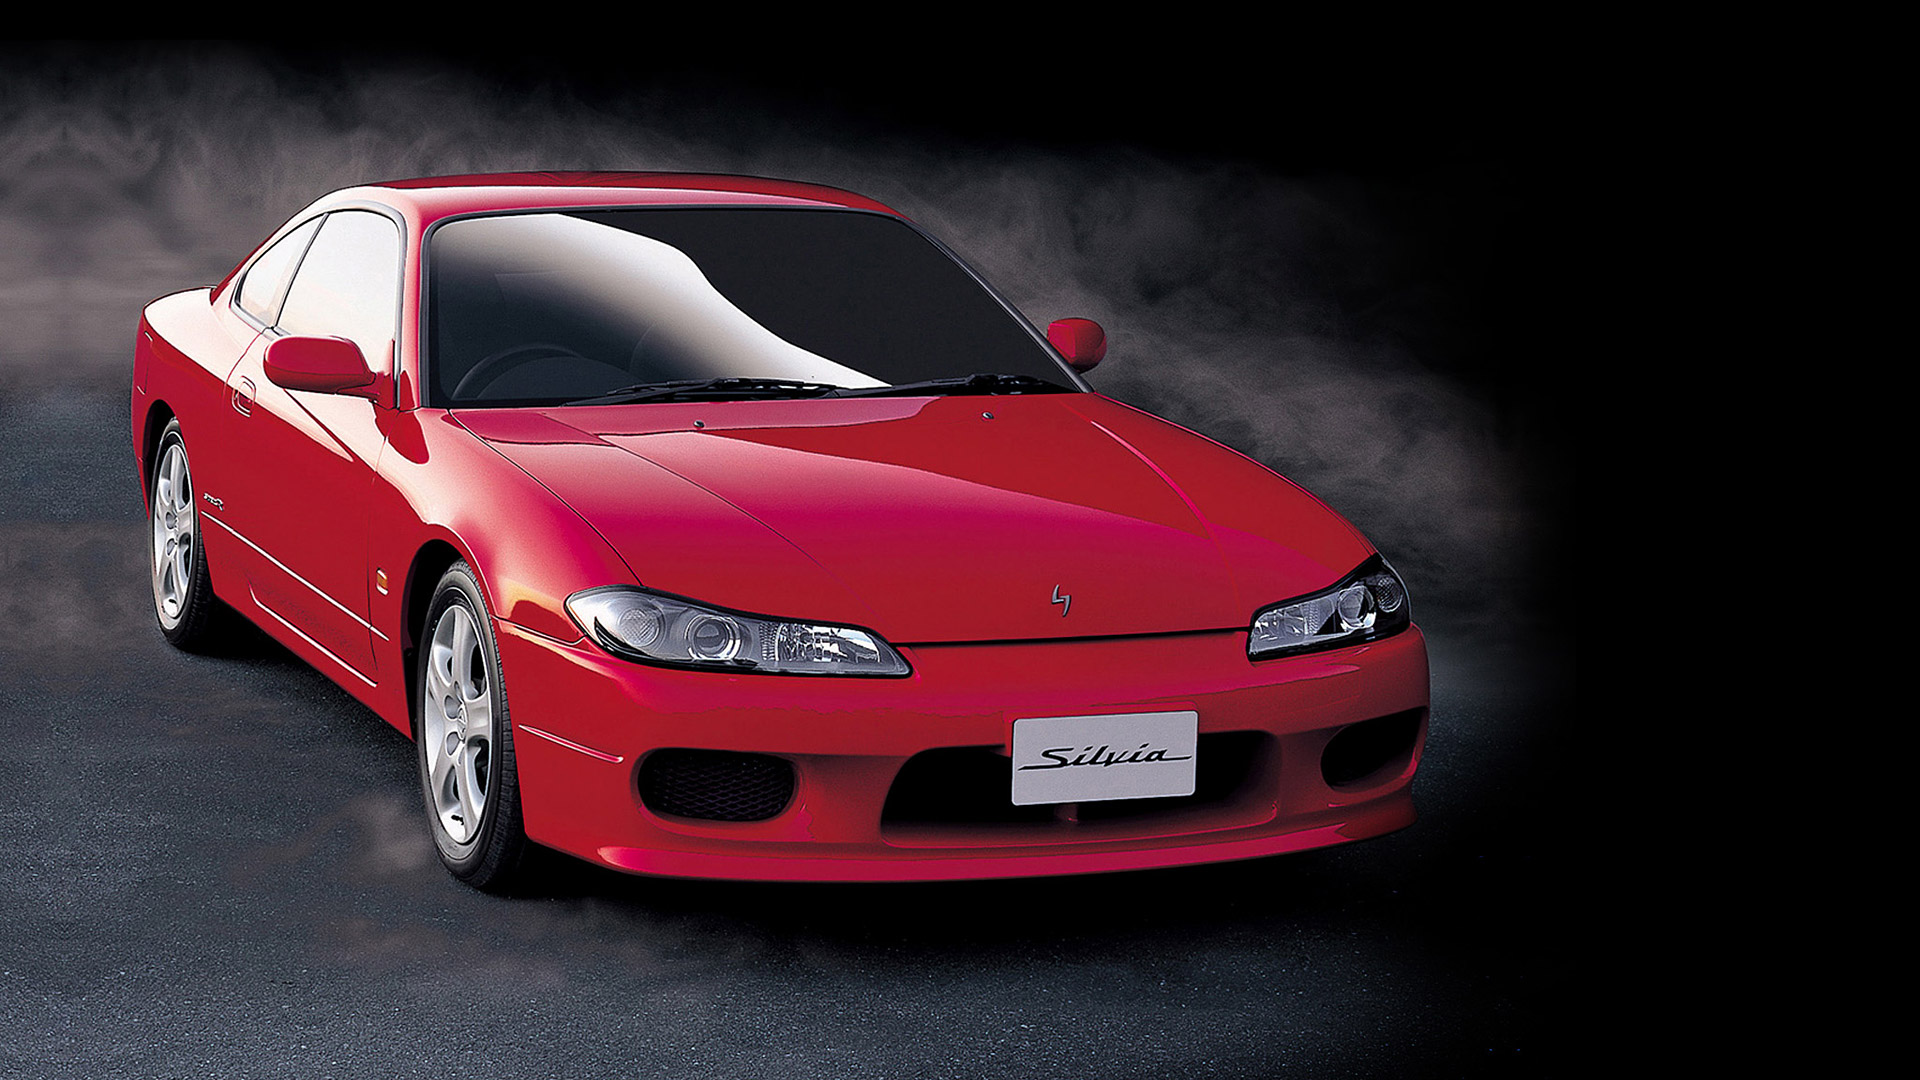 2000 Nissan Silvia Picture - Nissan Silvia S15 Stock , HD Wallpaper & Backgrounds